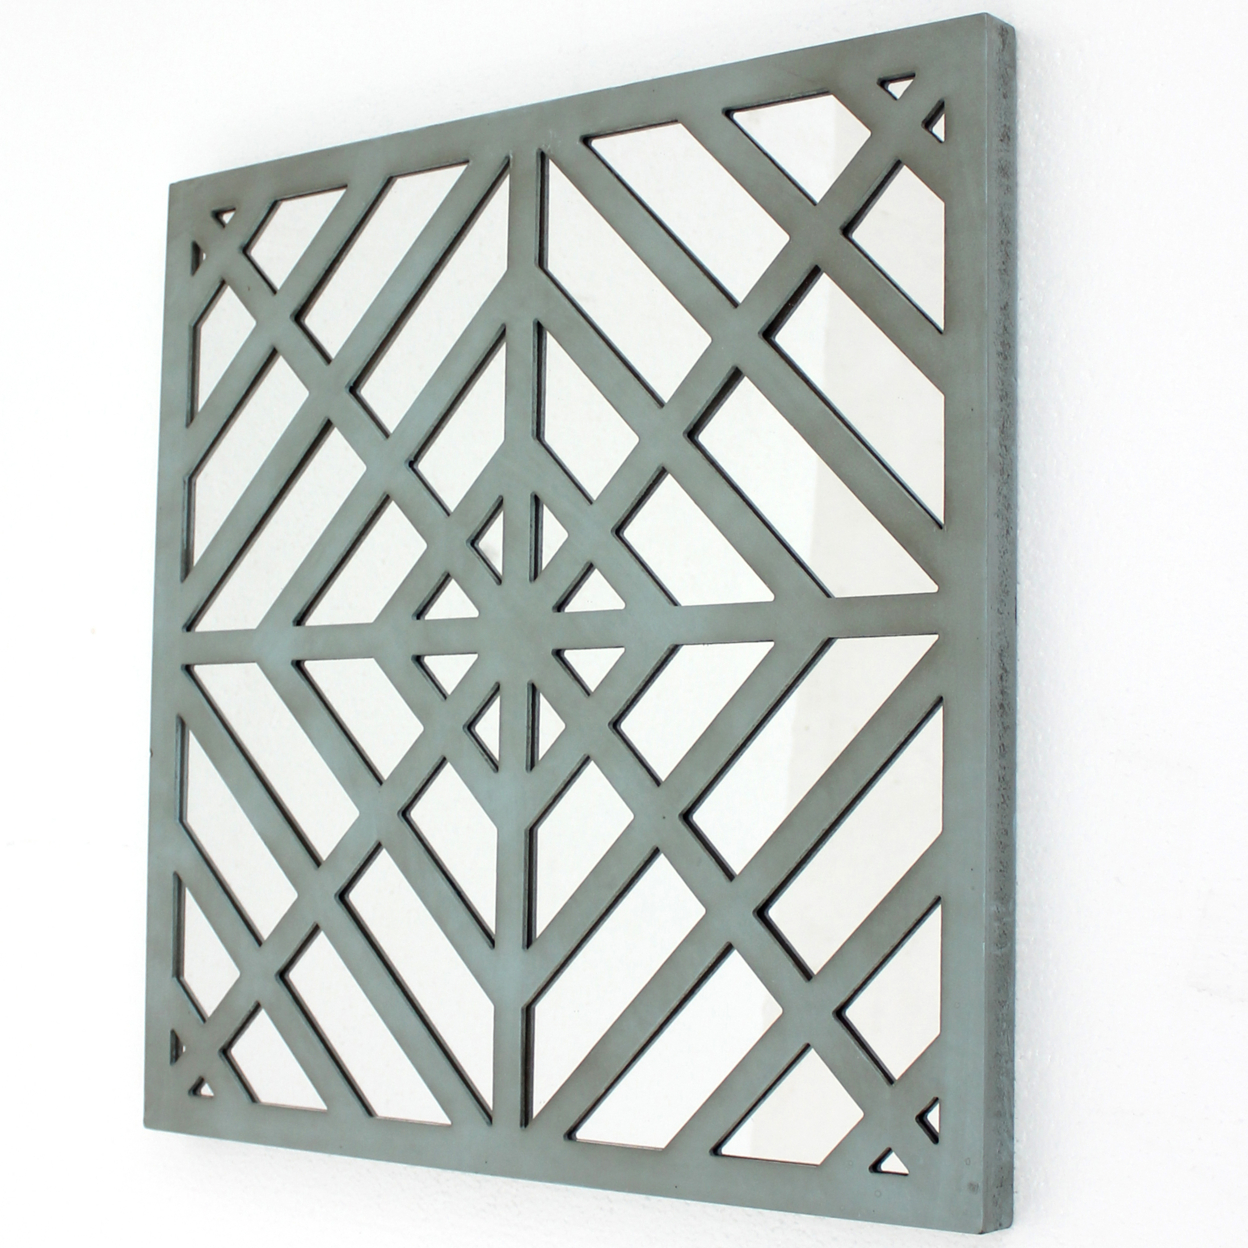 Contemporary Mirrored Wall Decor With Geometric Overlay On Top, Blue And Silver- Saltoro Sherpi